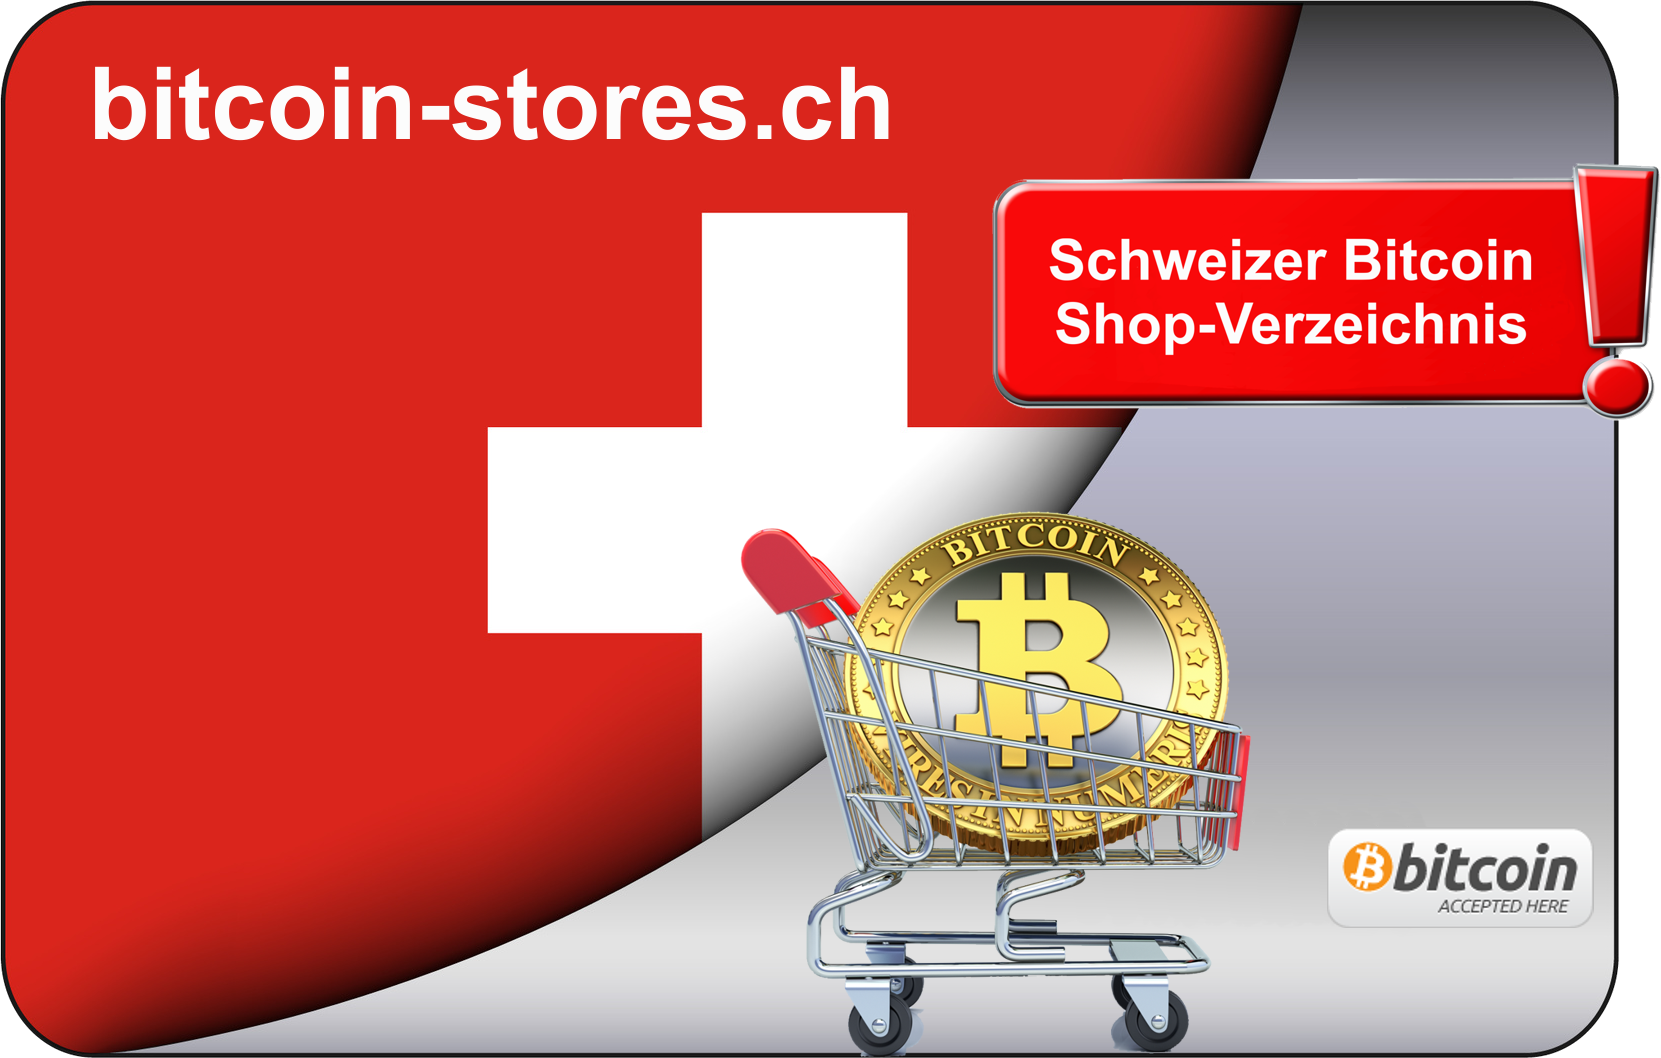 (c) Bitcoin-stores.ch